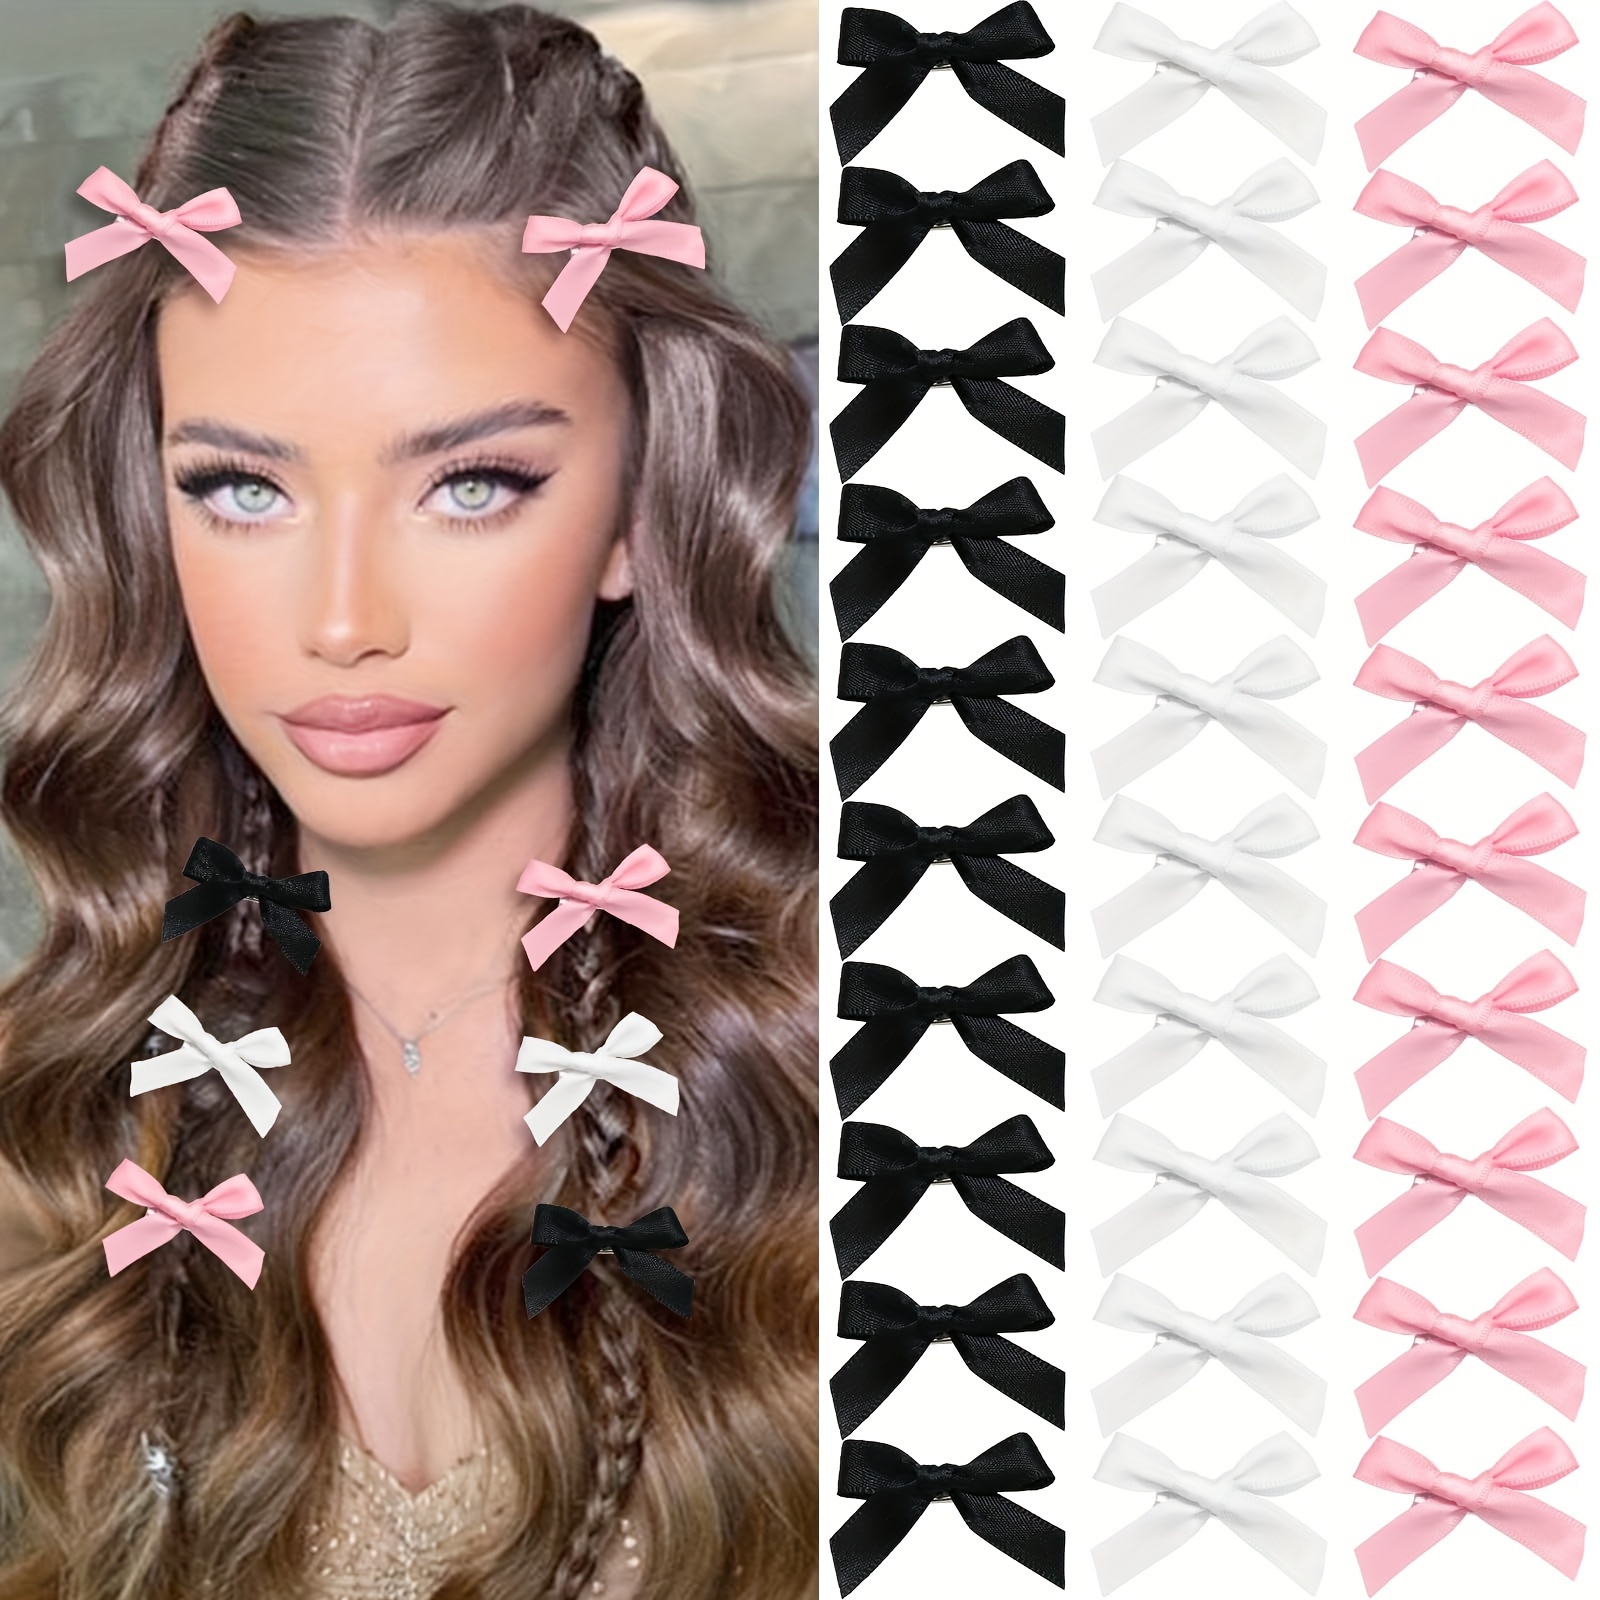 

30-piece Set Of Mini Bow Hair Clips - Sweet & Cute Non-slip Ribbon Barrettes For Women And Girls, Perfect For All Hair Types